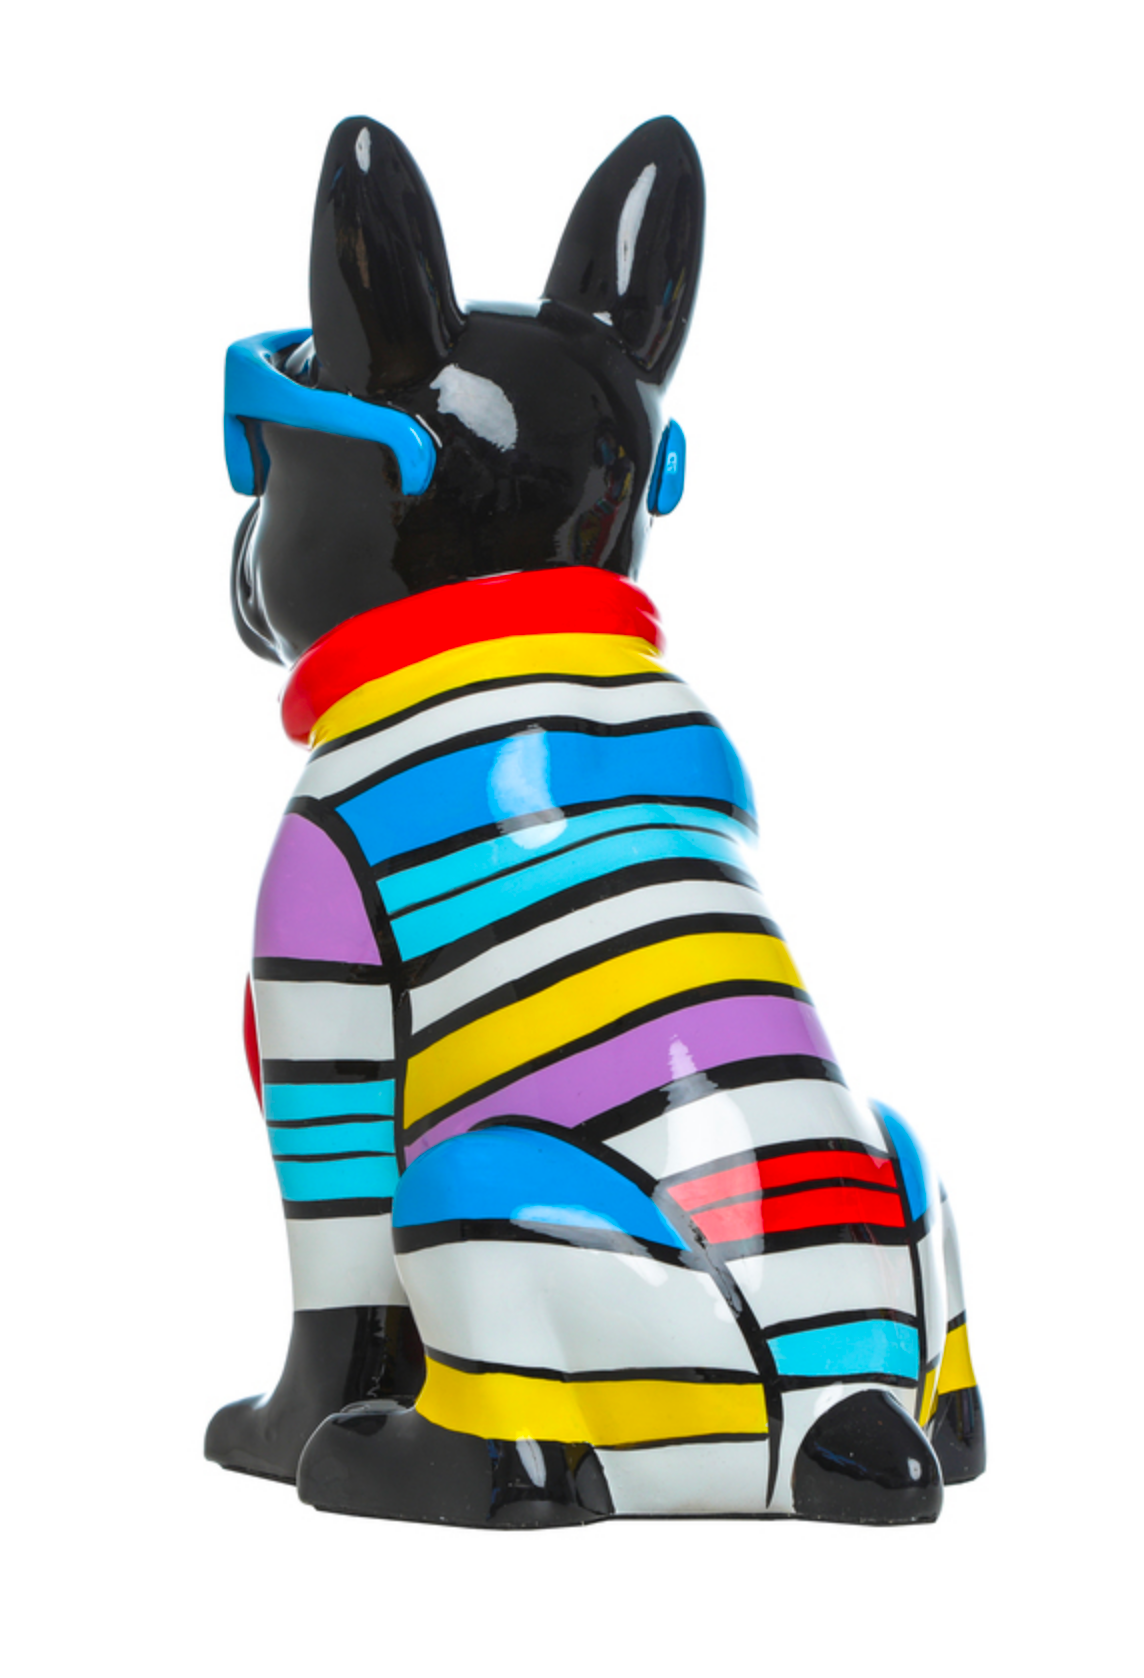 French Bulldog Color Stripe with Blue Sunglasses - Sitting